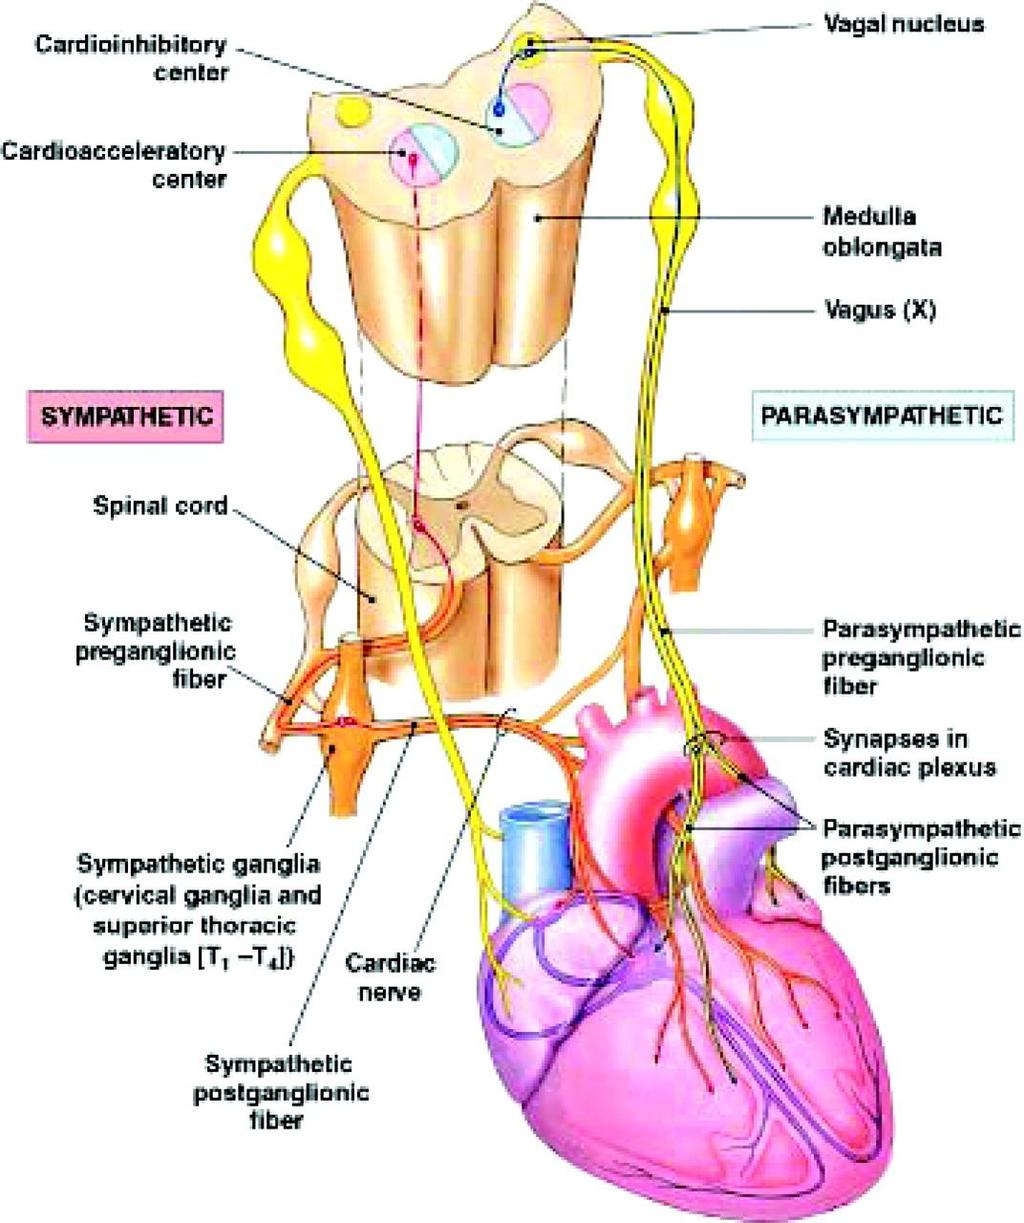 superficial plexus It is formed by the superior cardiac branch of the left sympathetic trunk and the lower superior cervical cardiac branch of the left vagus